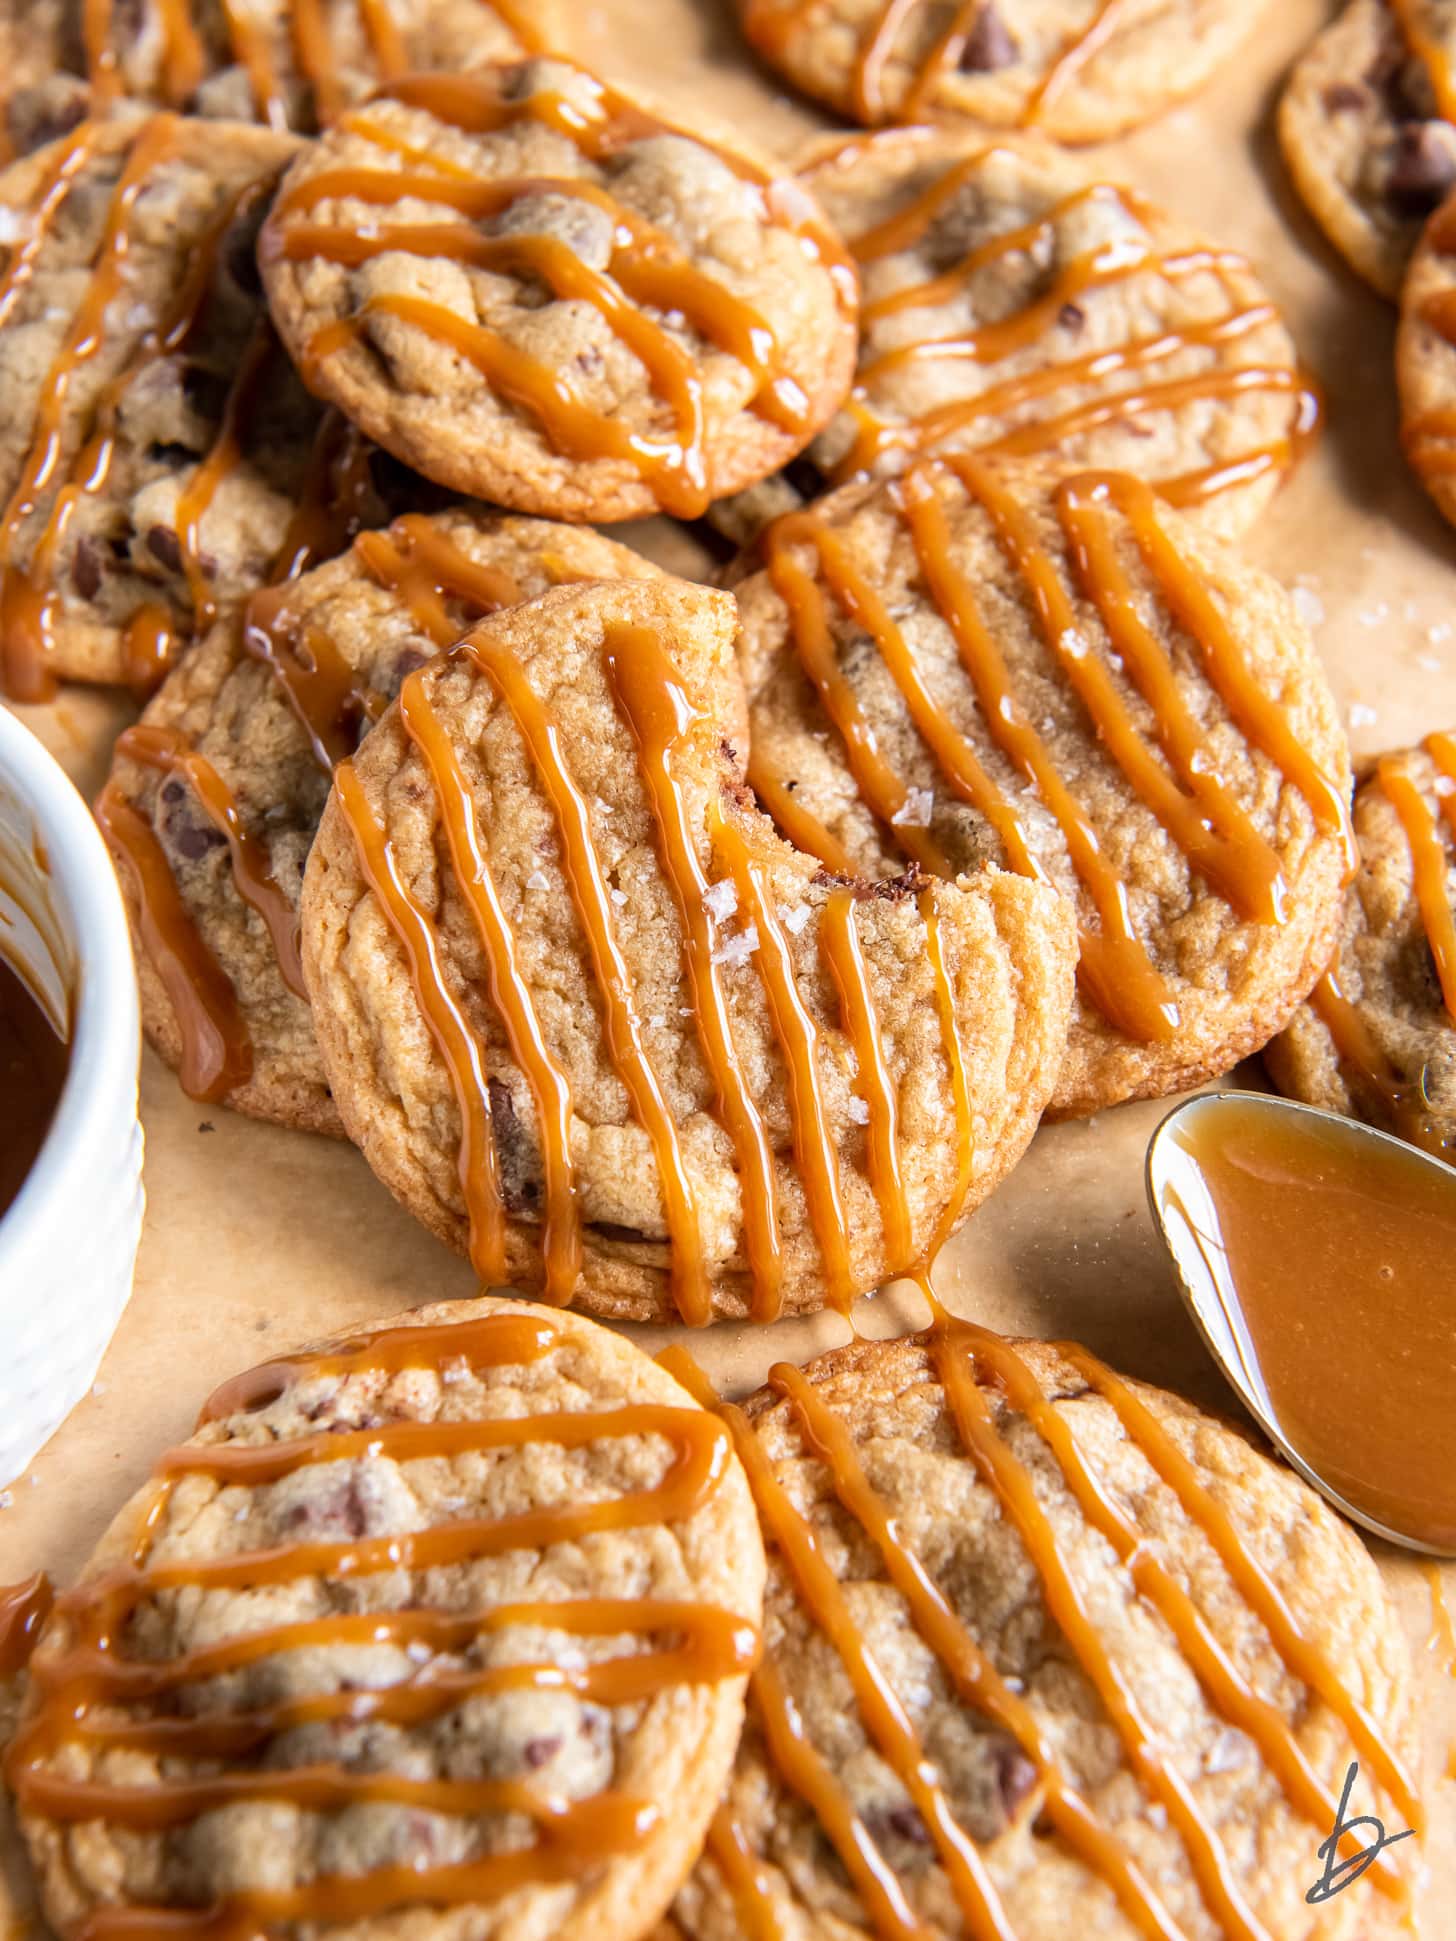 caramel cookie with bite leaning on other cookies with caramel drizzle.